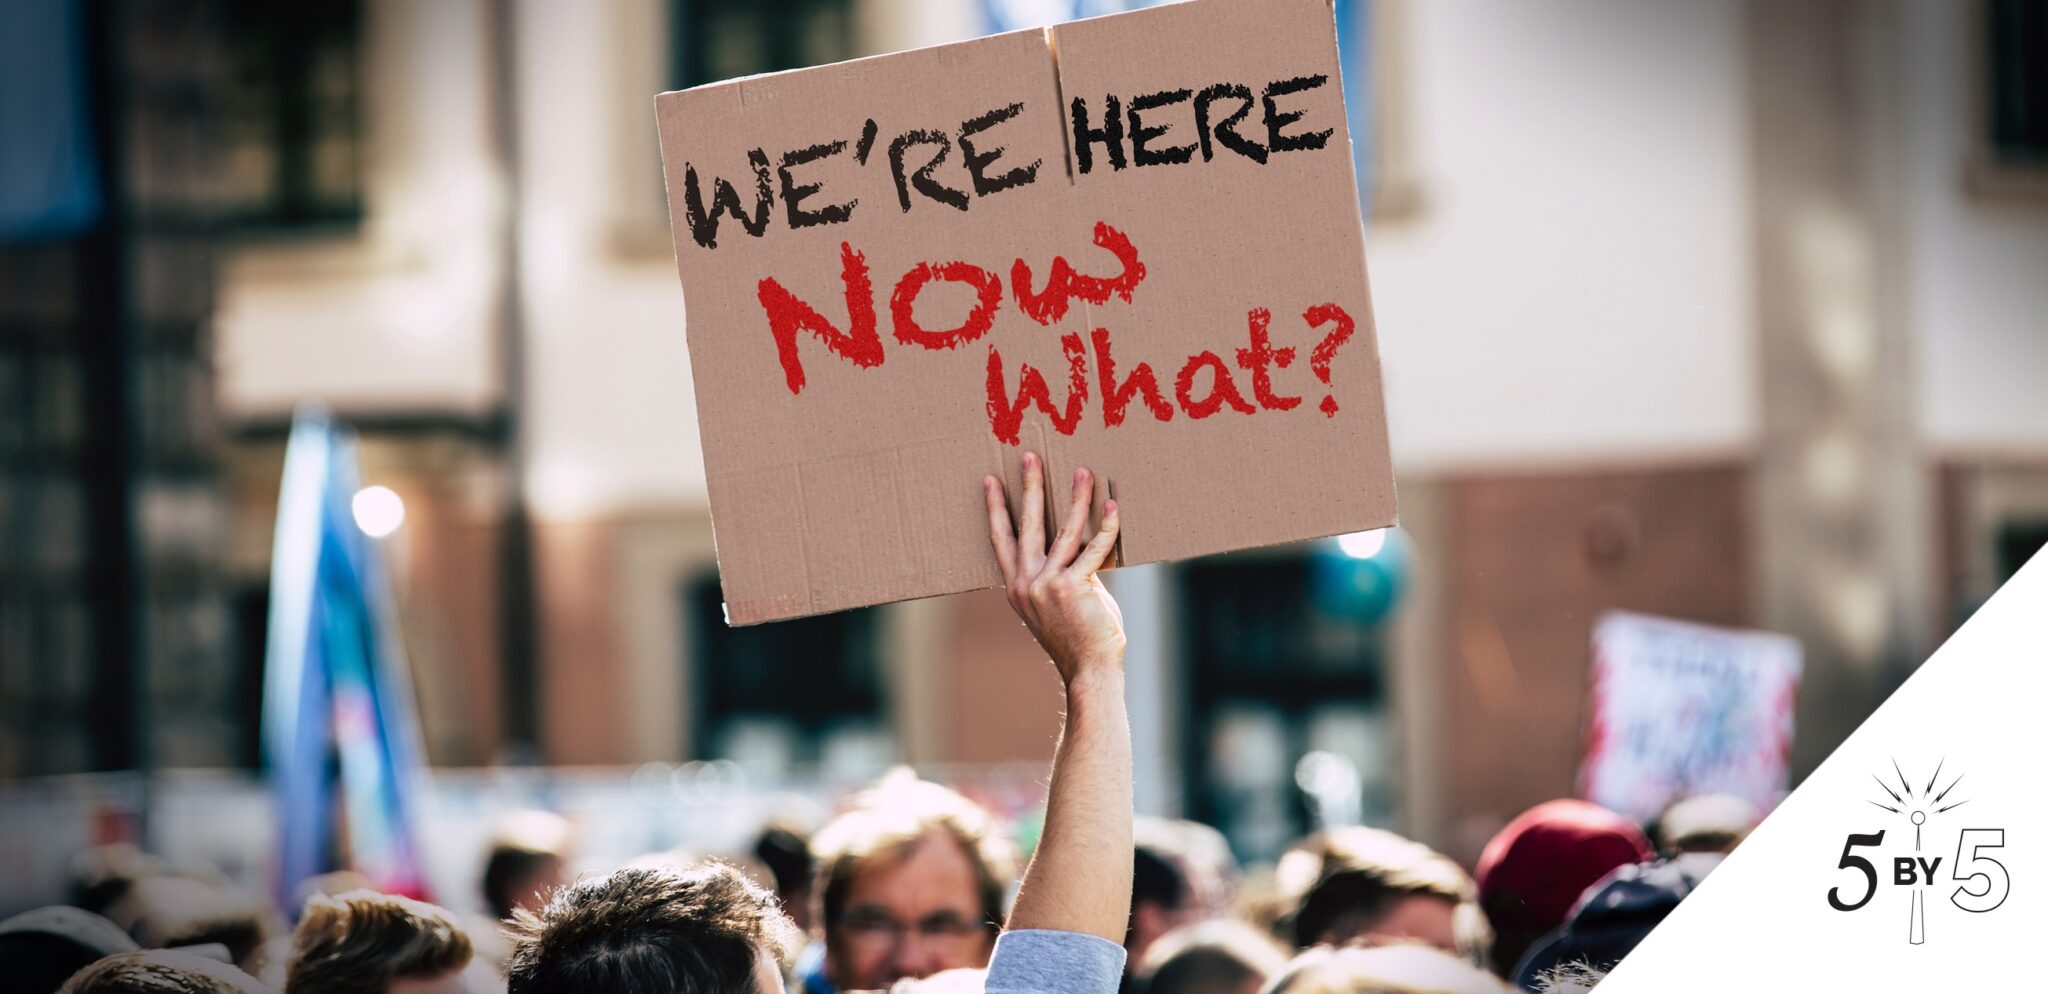 man's arm above crowd holding sign "We're Here. Now What?"